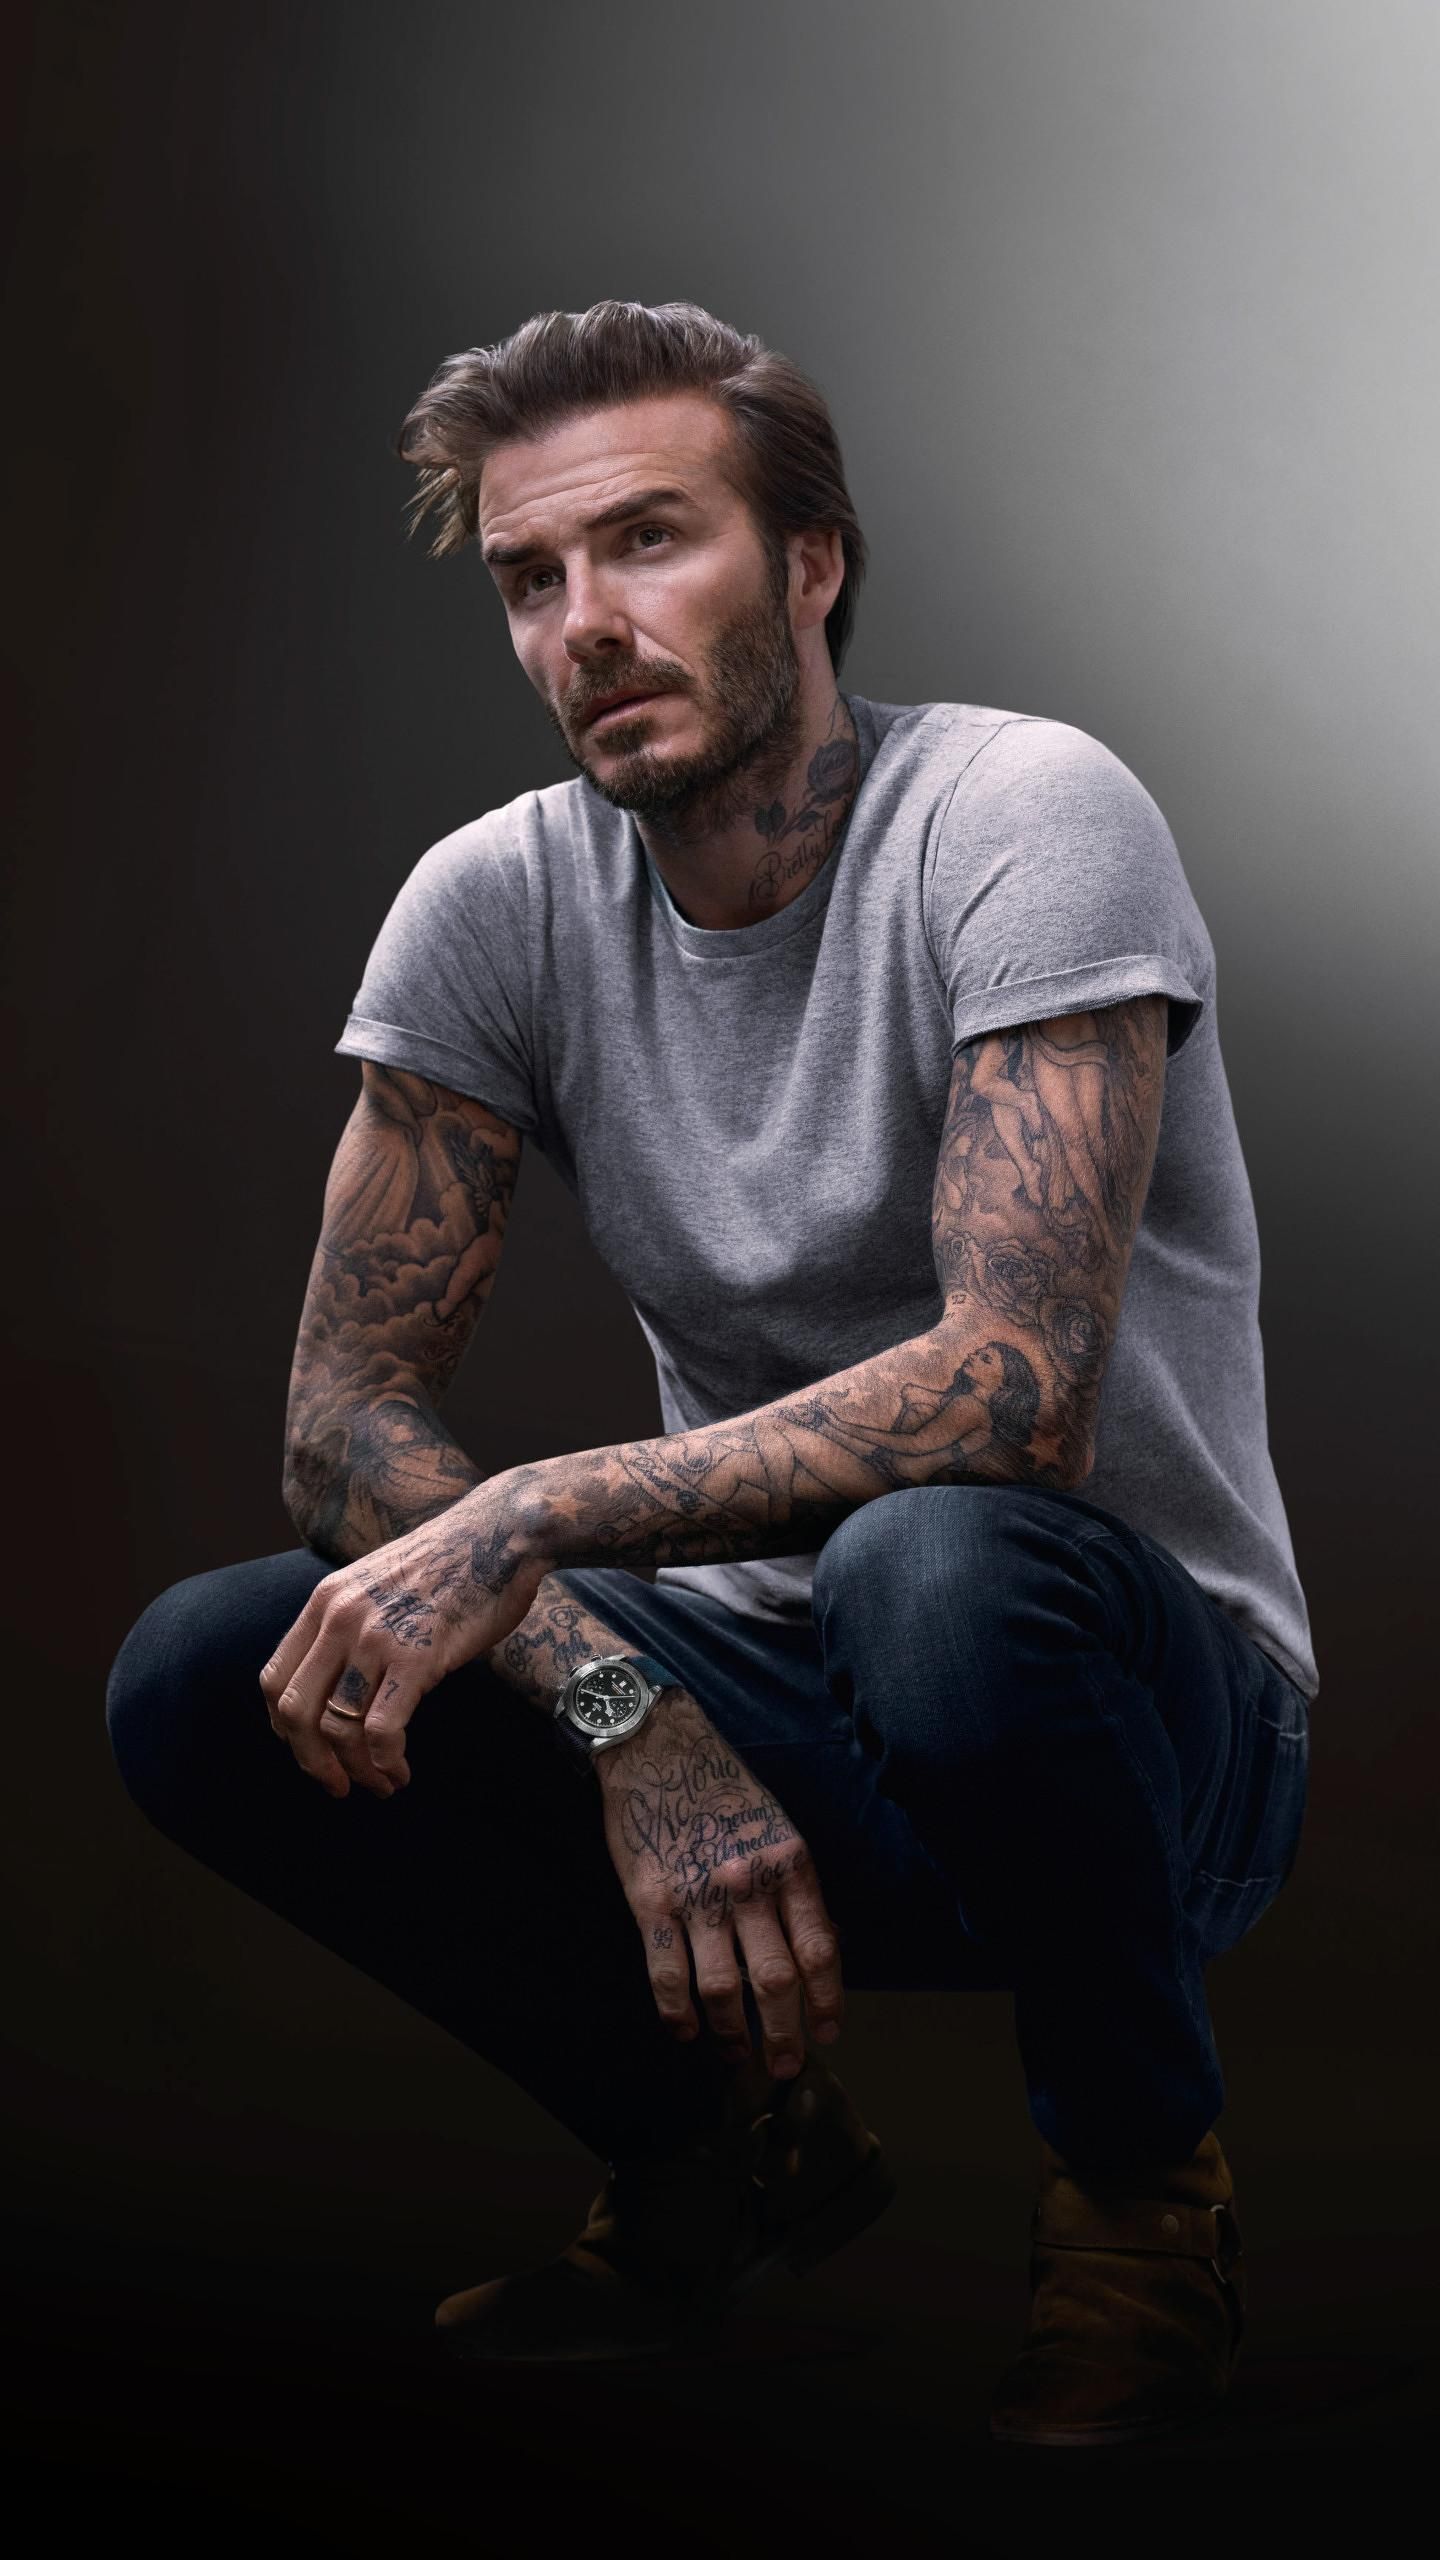 David Beckham 2018 4K, HD Sports Wallpapers Photos and Pictures